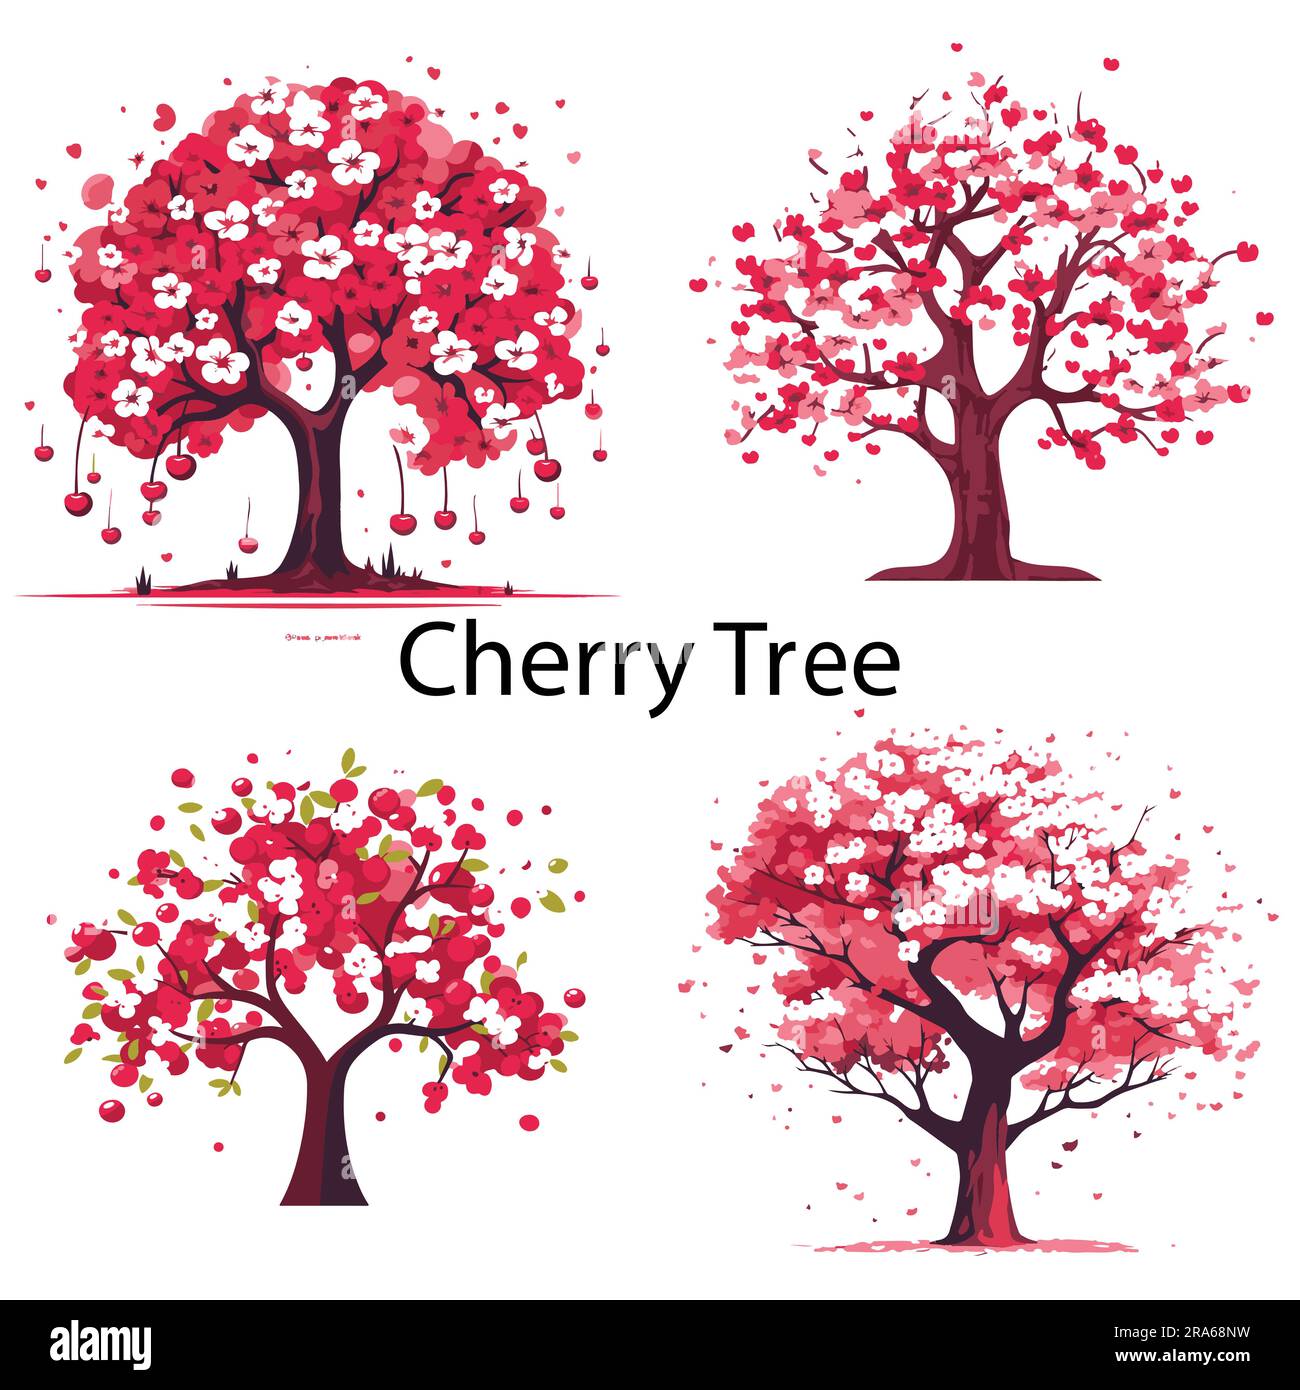 Cherry tree flat vector illustration collection. Stock Vector